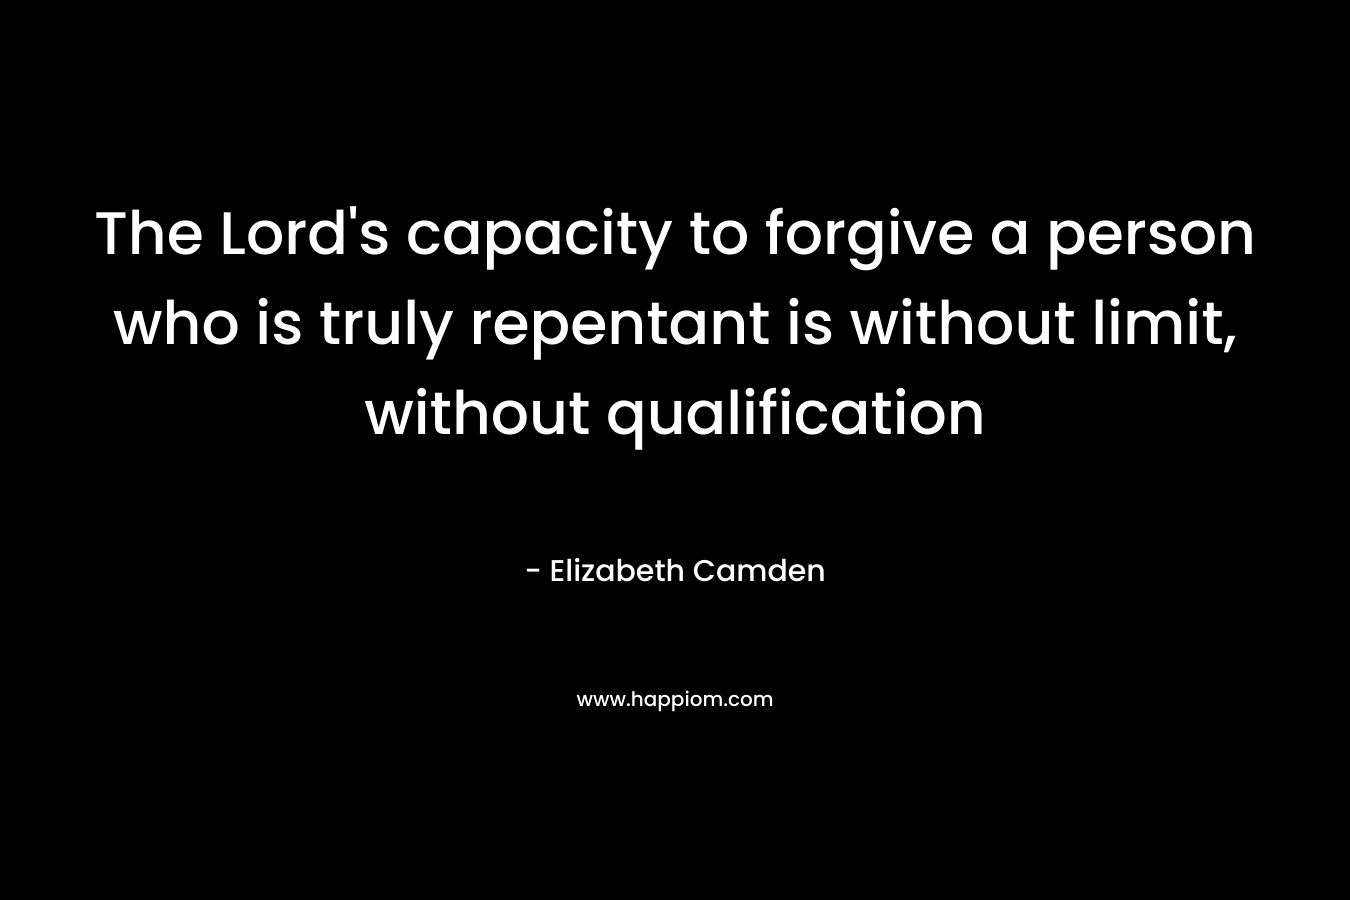 The Lord’s capacity to forgive a person who is truly repentant is without limit, without qualification – Elizabeth Camden